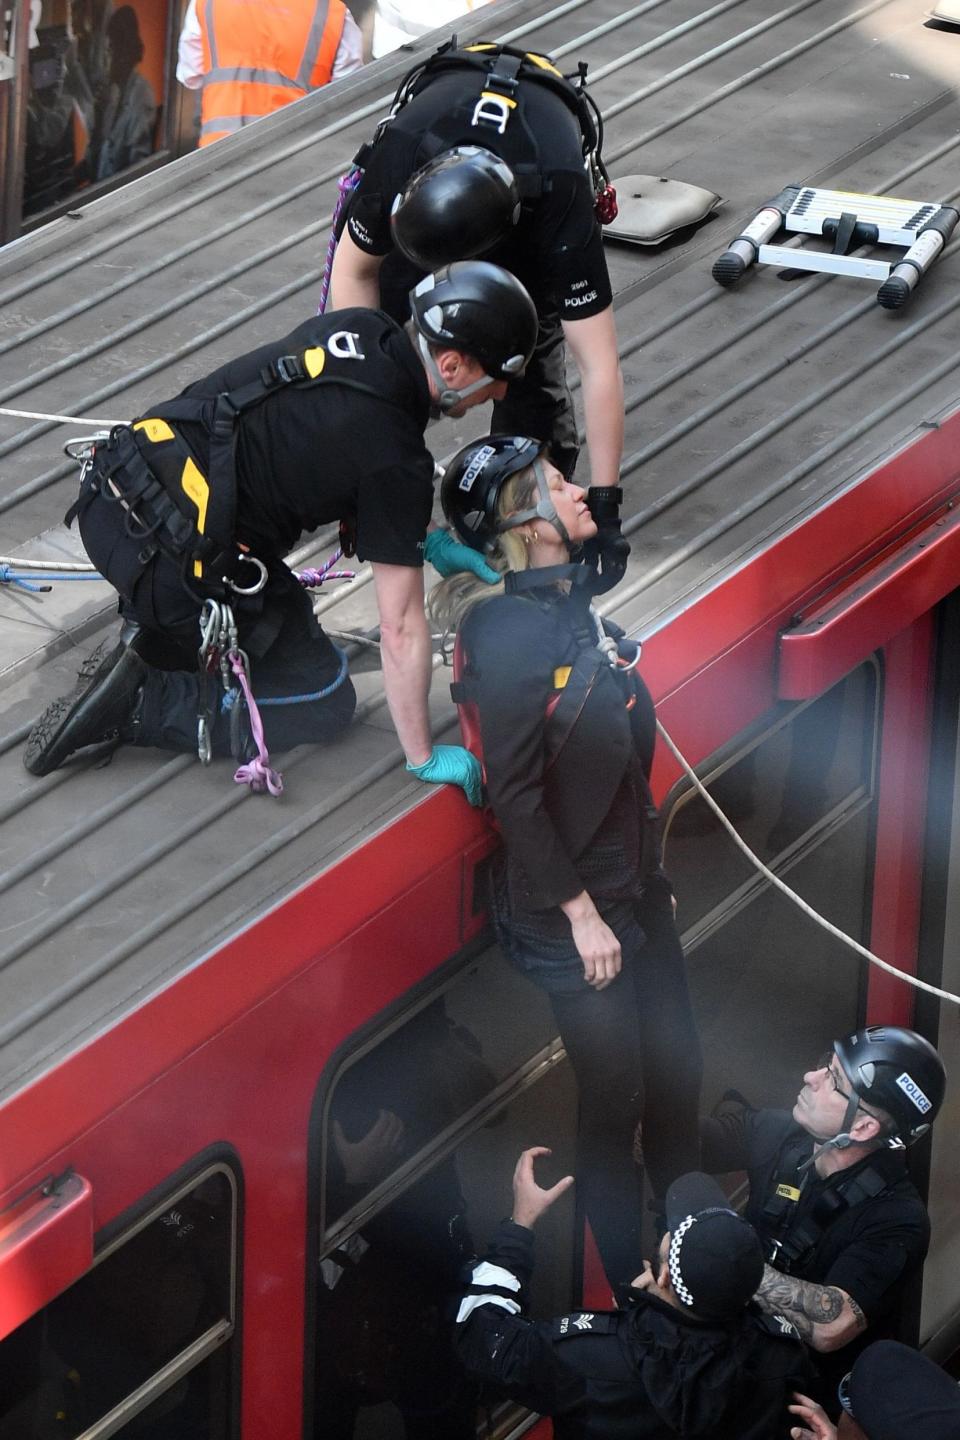 A climate protester is removed from the top of the DLR train (AFP/Getty Images)